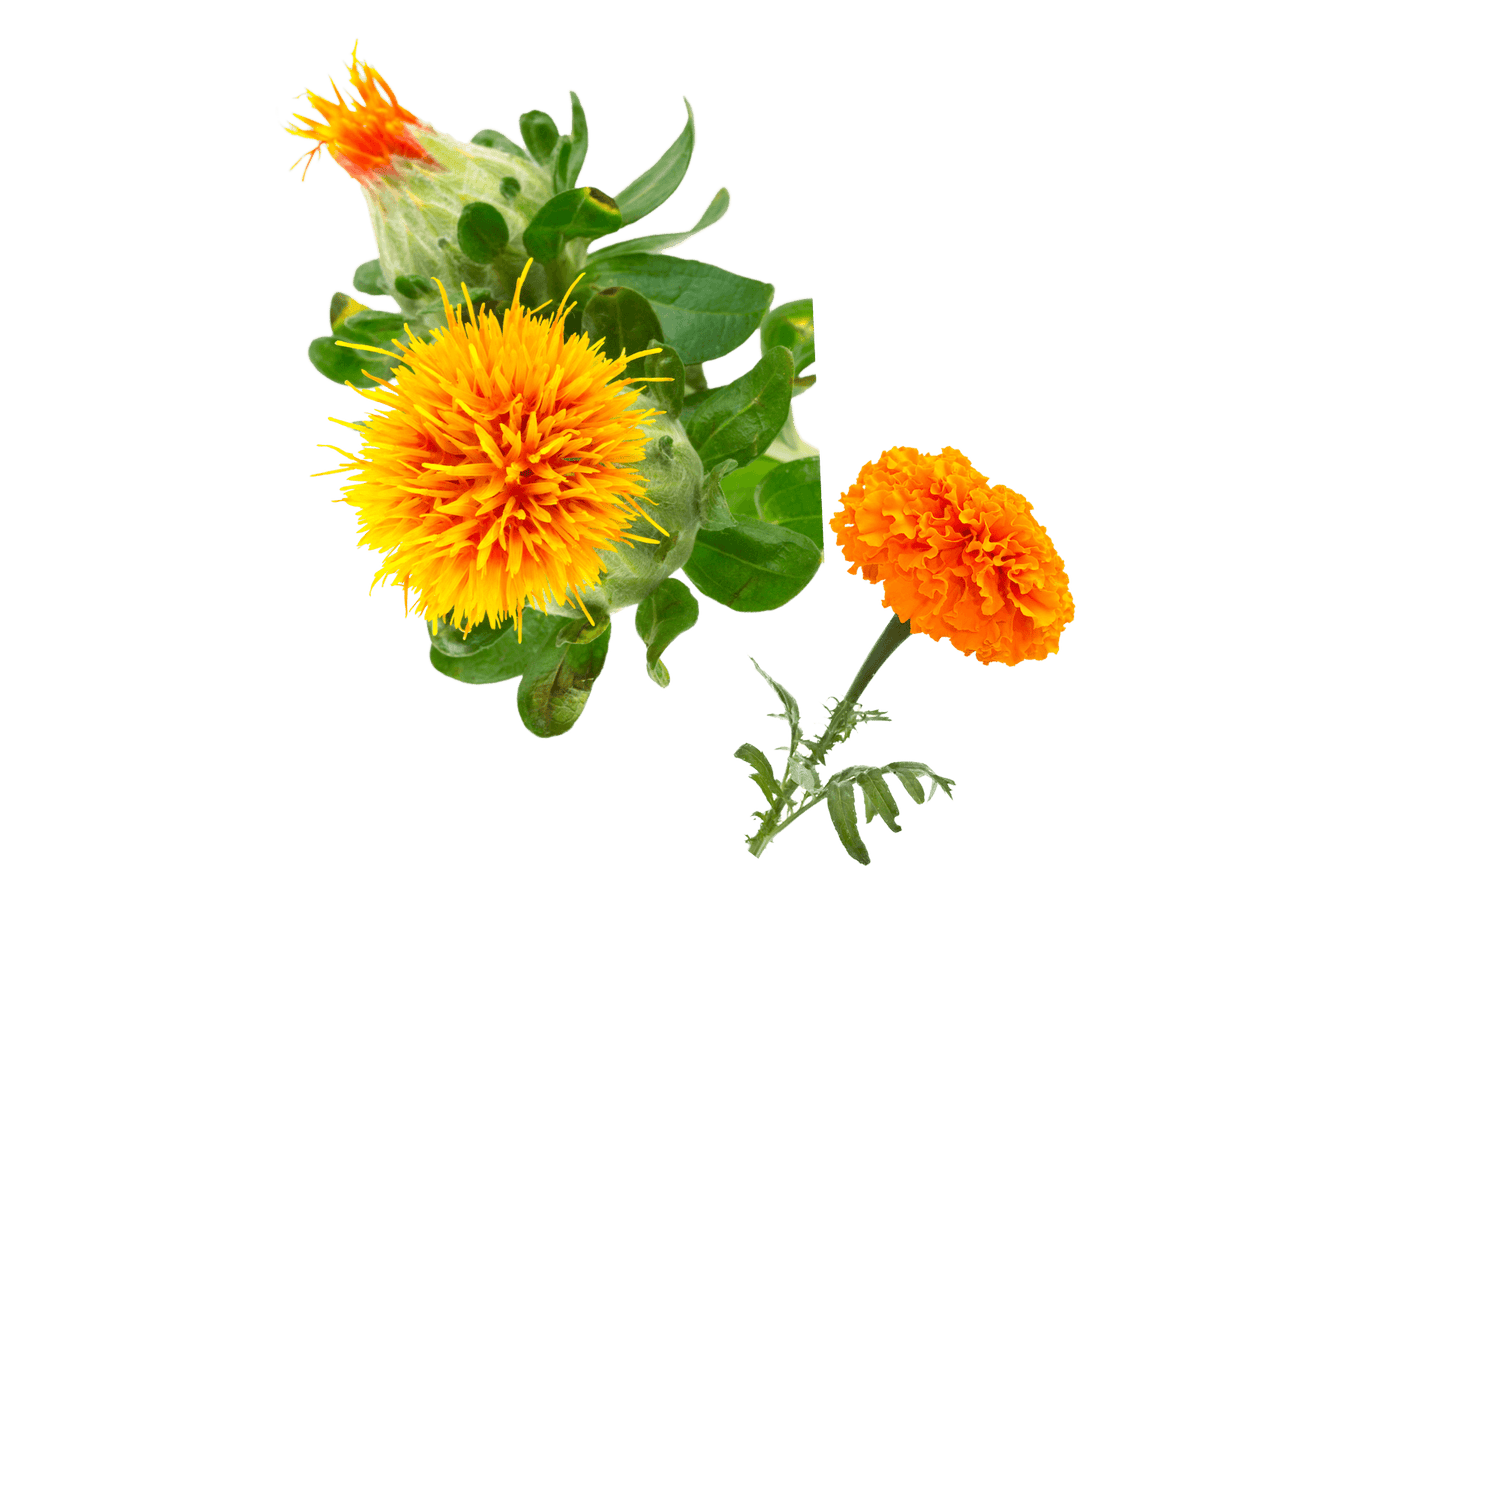 Safflower and marigold on a white background